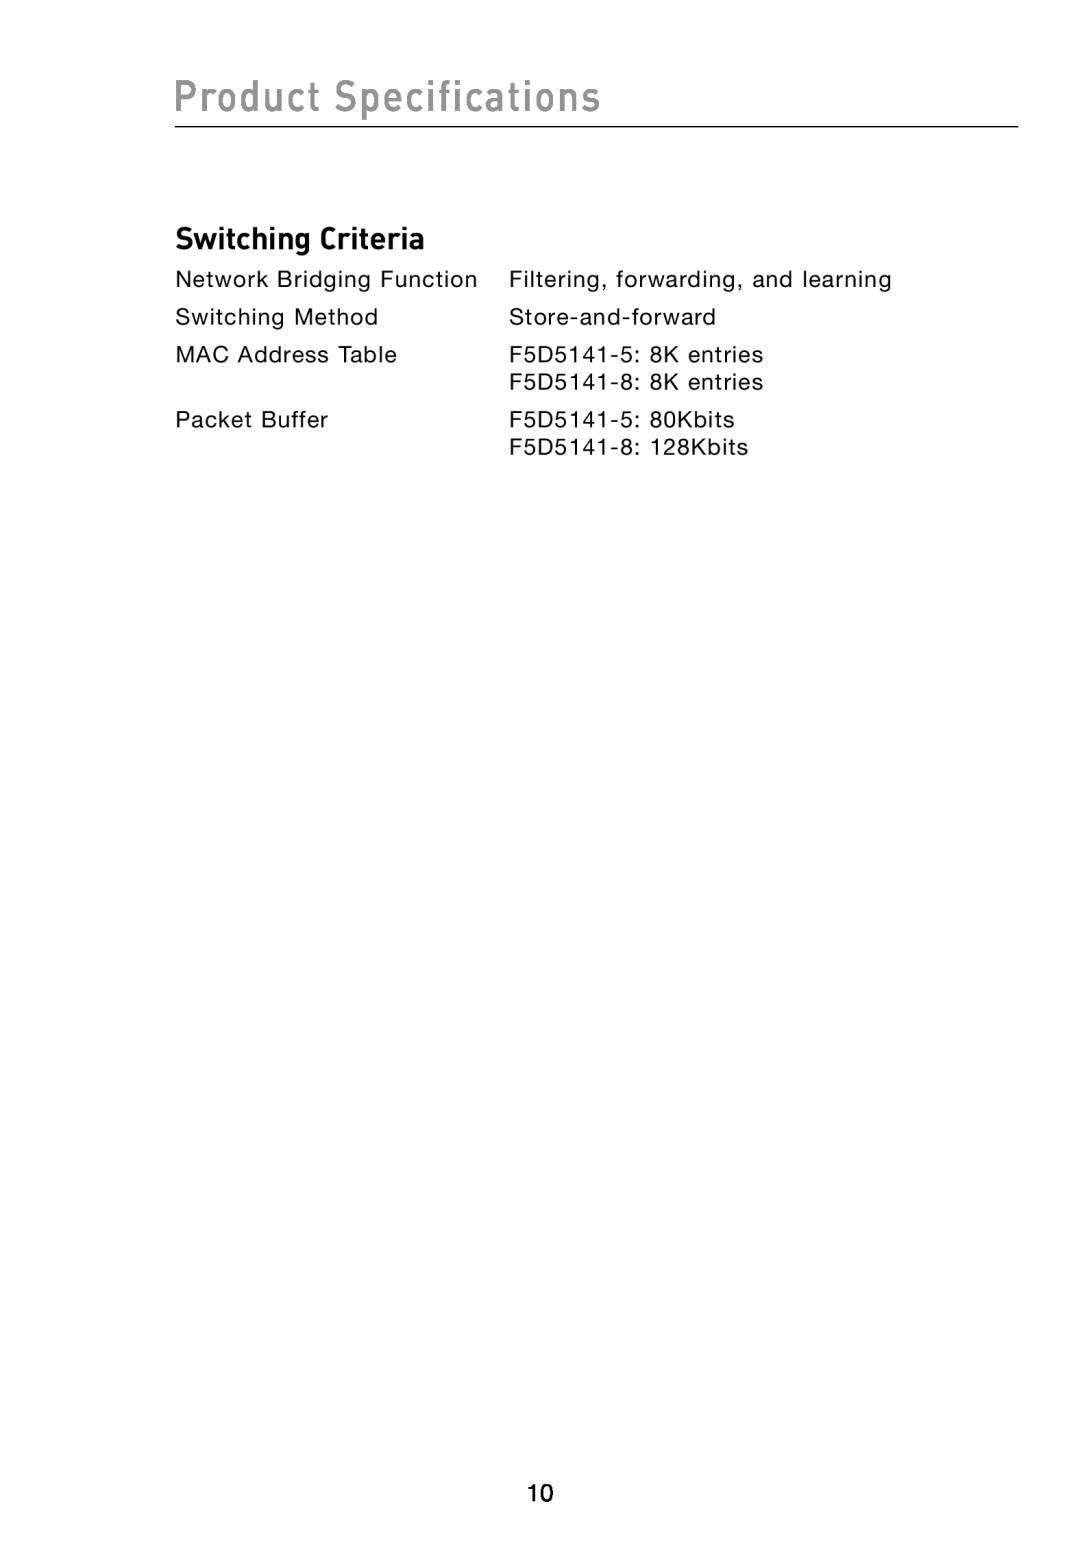 Belkin F5D5141-5 manual Product Specifications, Switching Criteria 